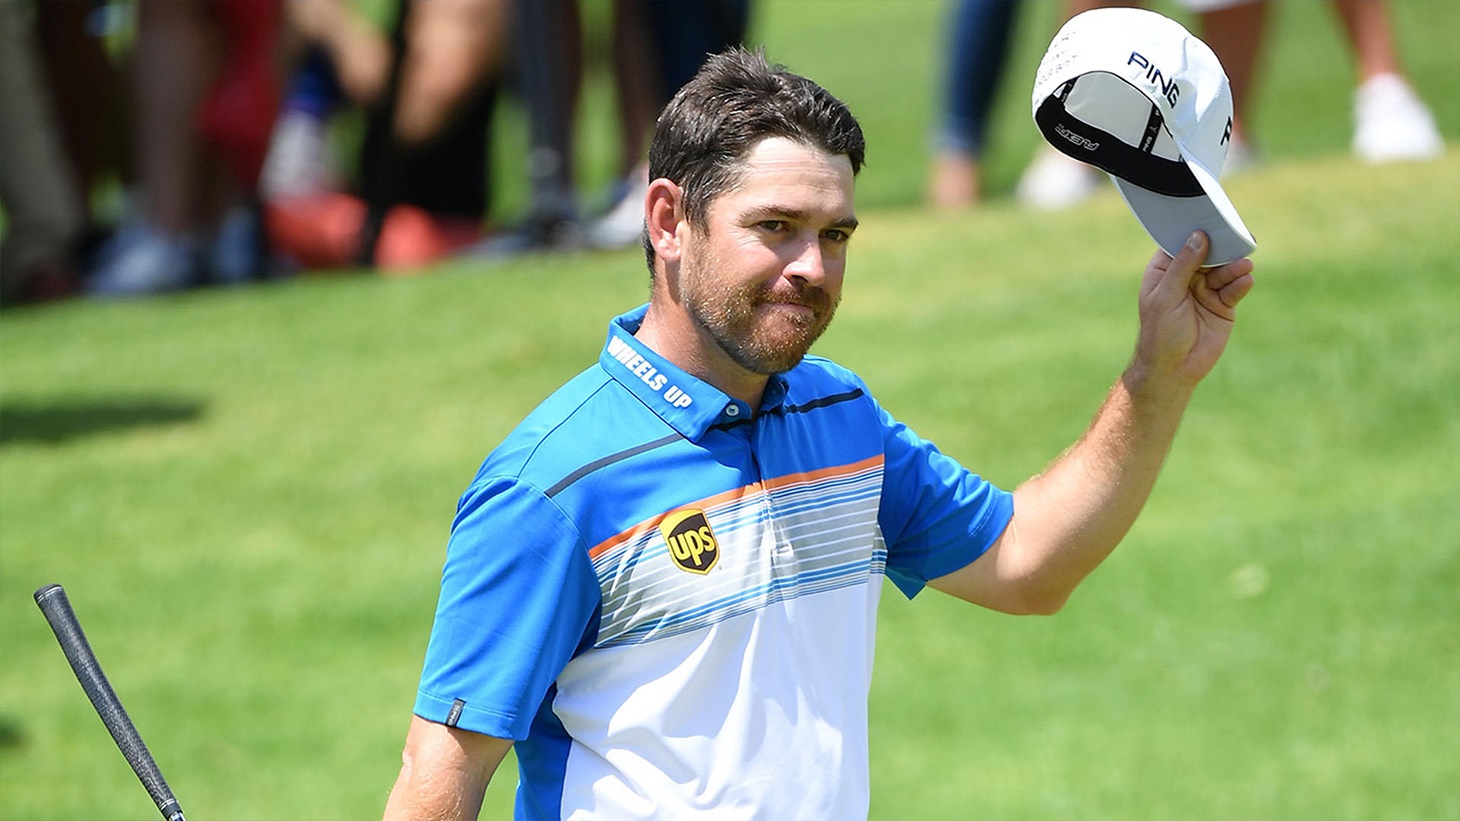 Louis Oosthuizen salutes the crowd after winning the 2019 South African Open